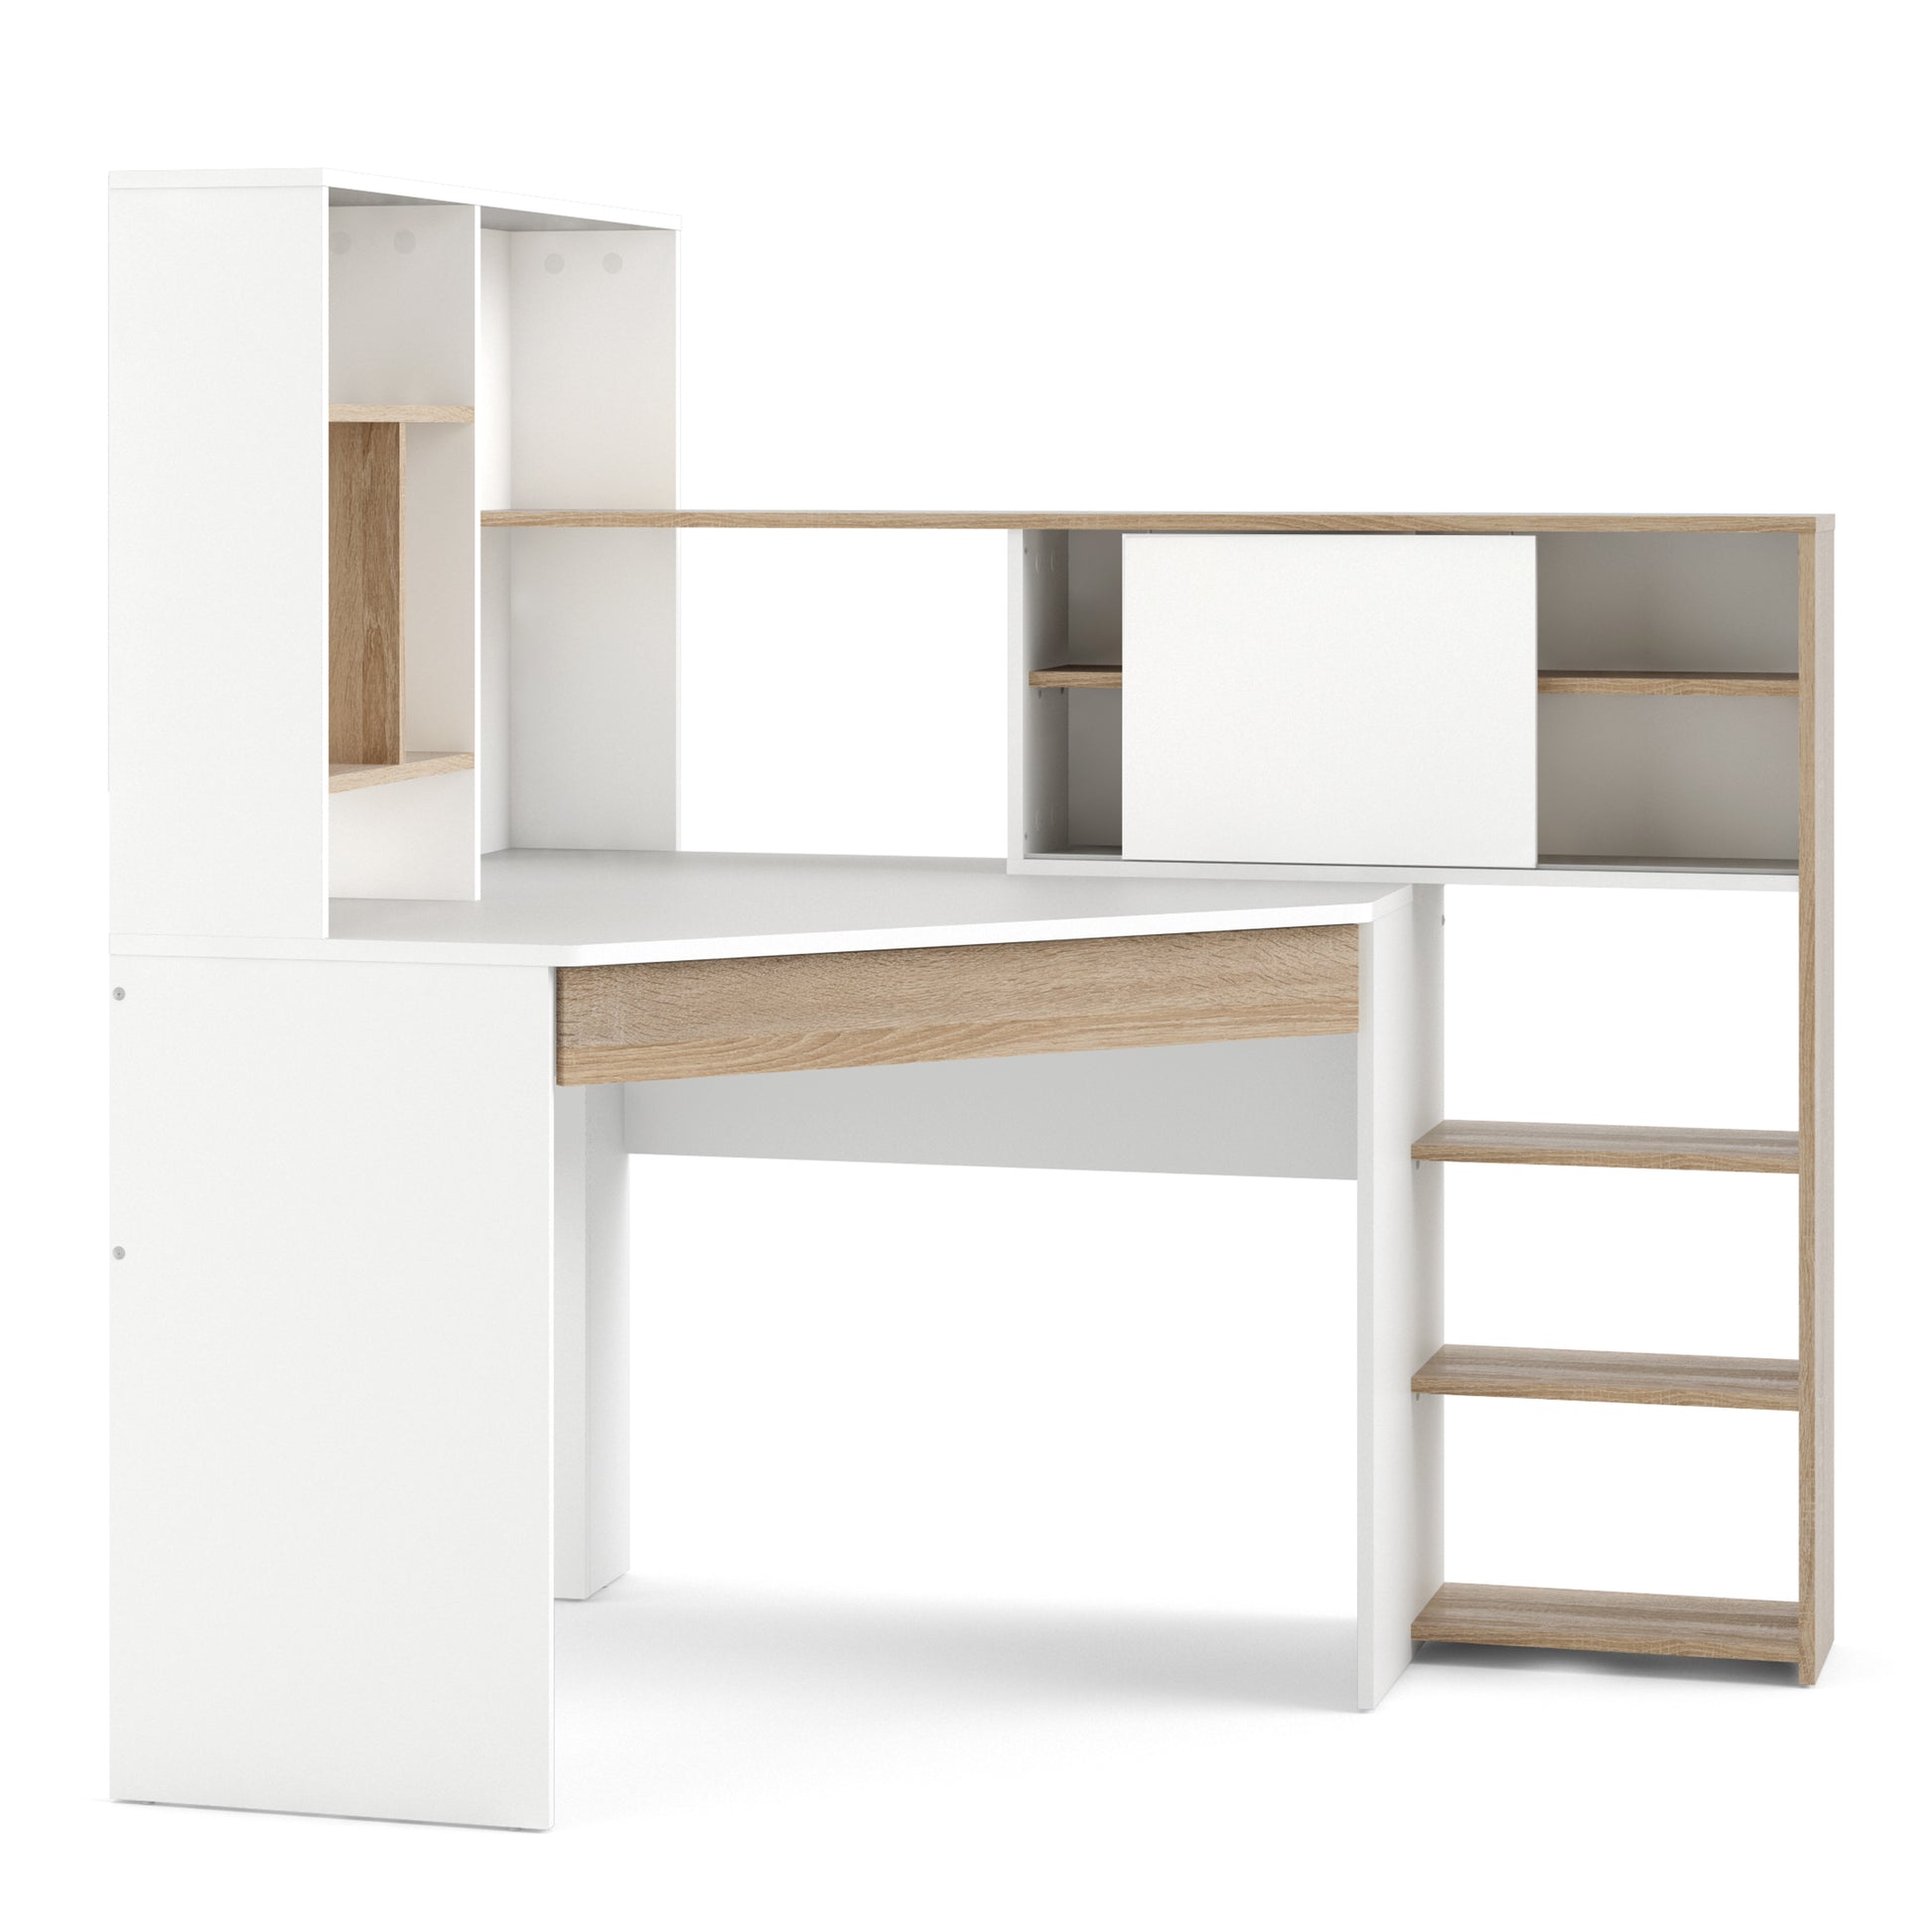 Function Plus  Corner Desk with multi-functional unit In White and Oak